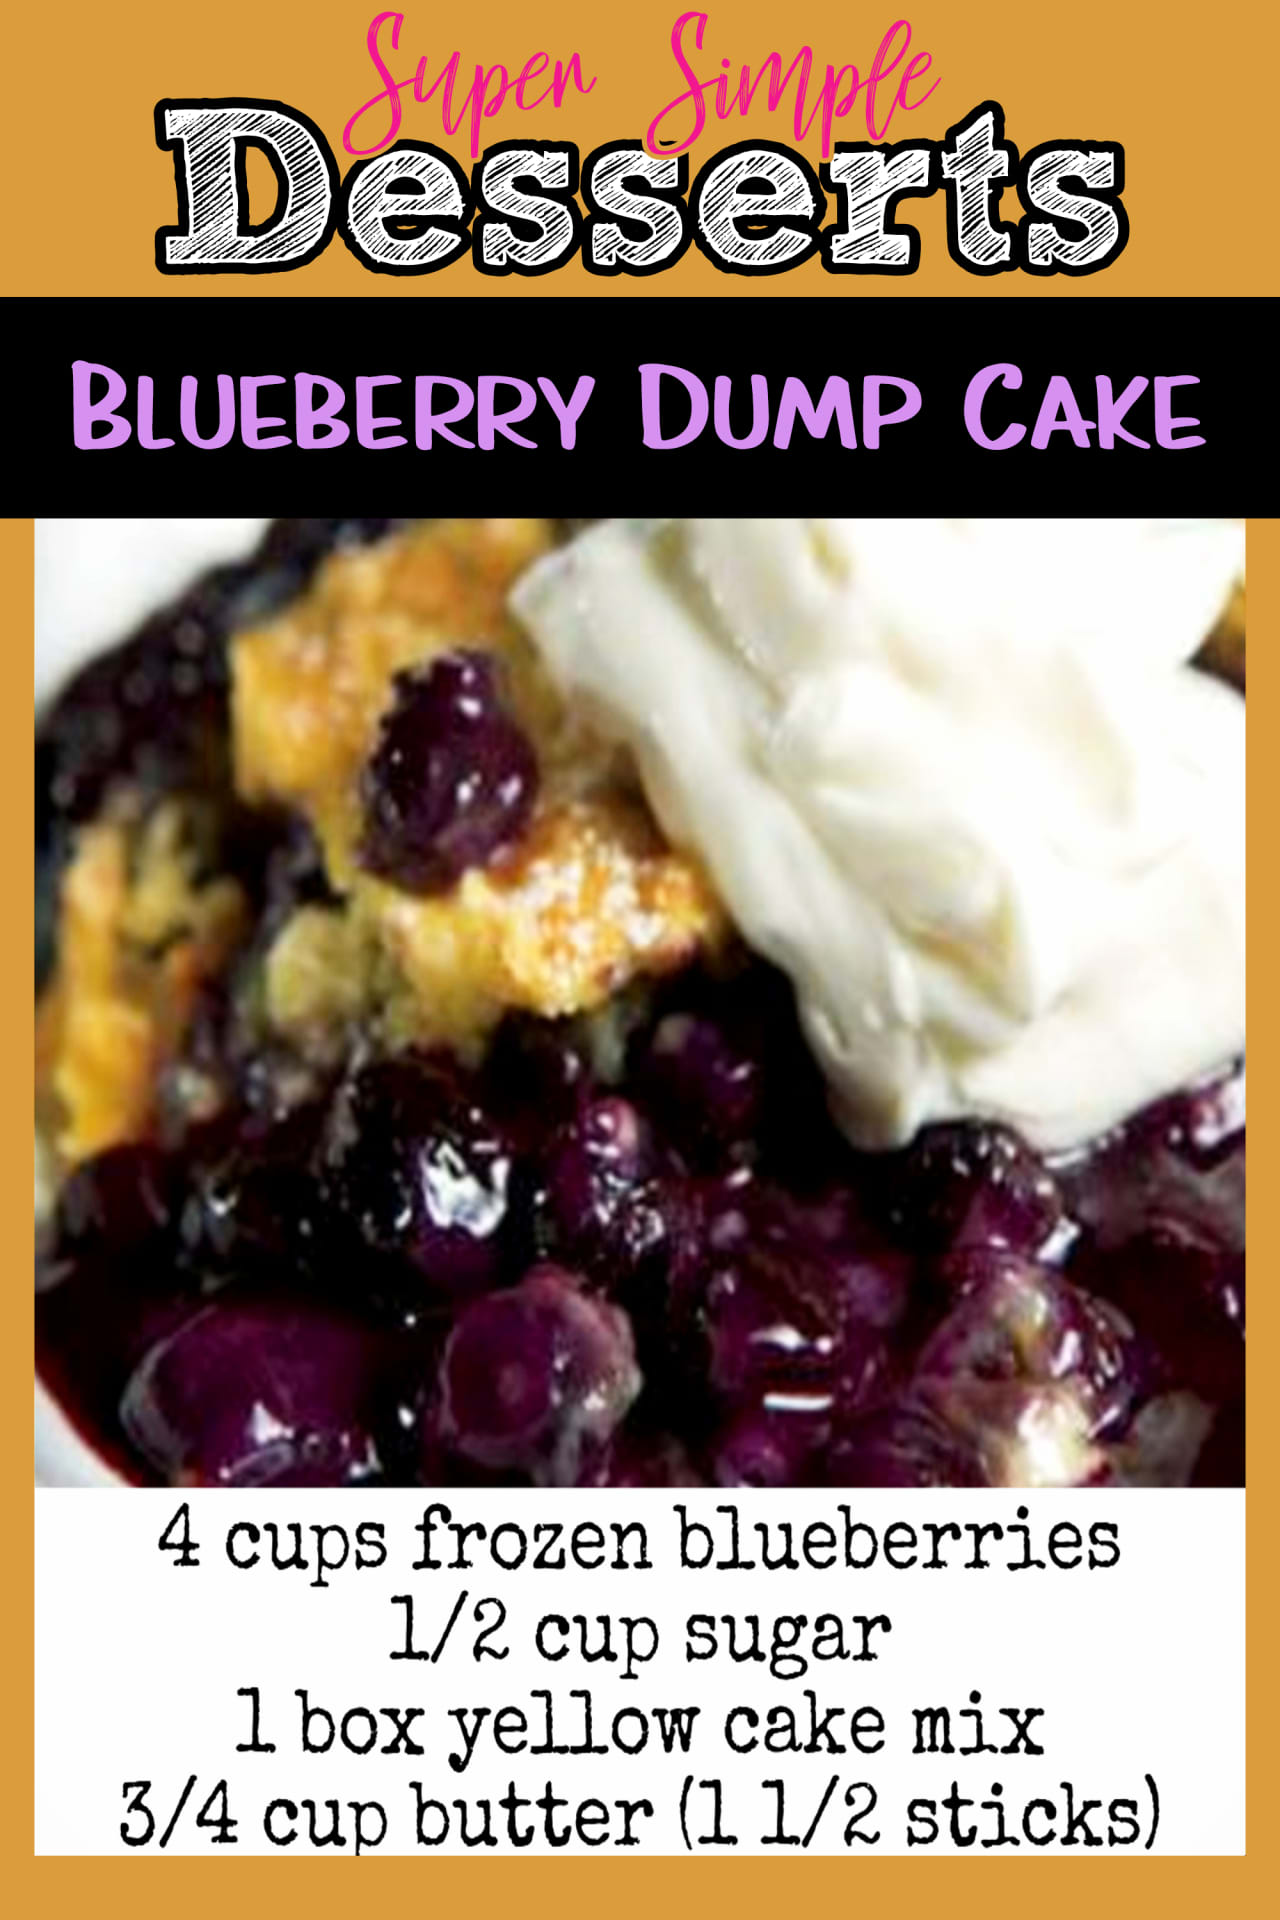 super simple desserts for a crowd - easy party dessert ideas - simple blueberry dump cake recipe with frozen blueberries and cake mix